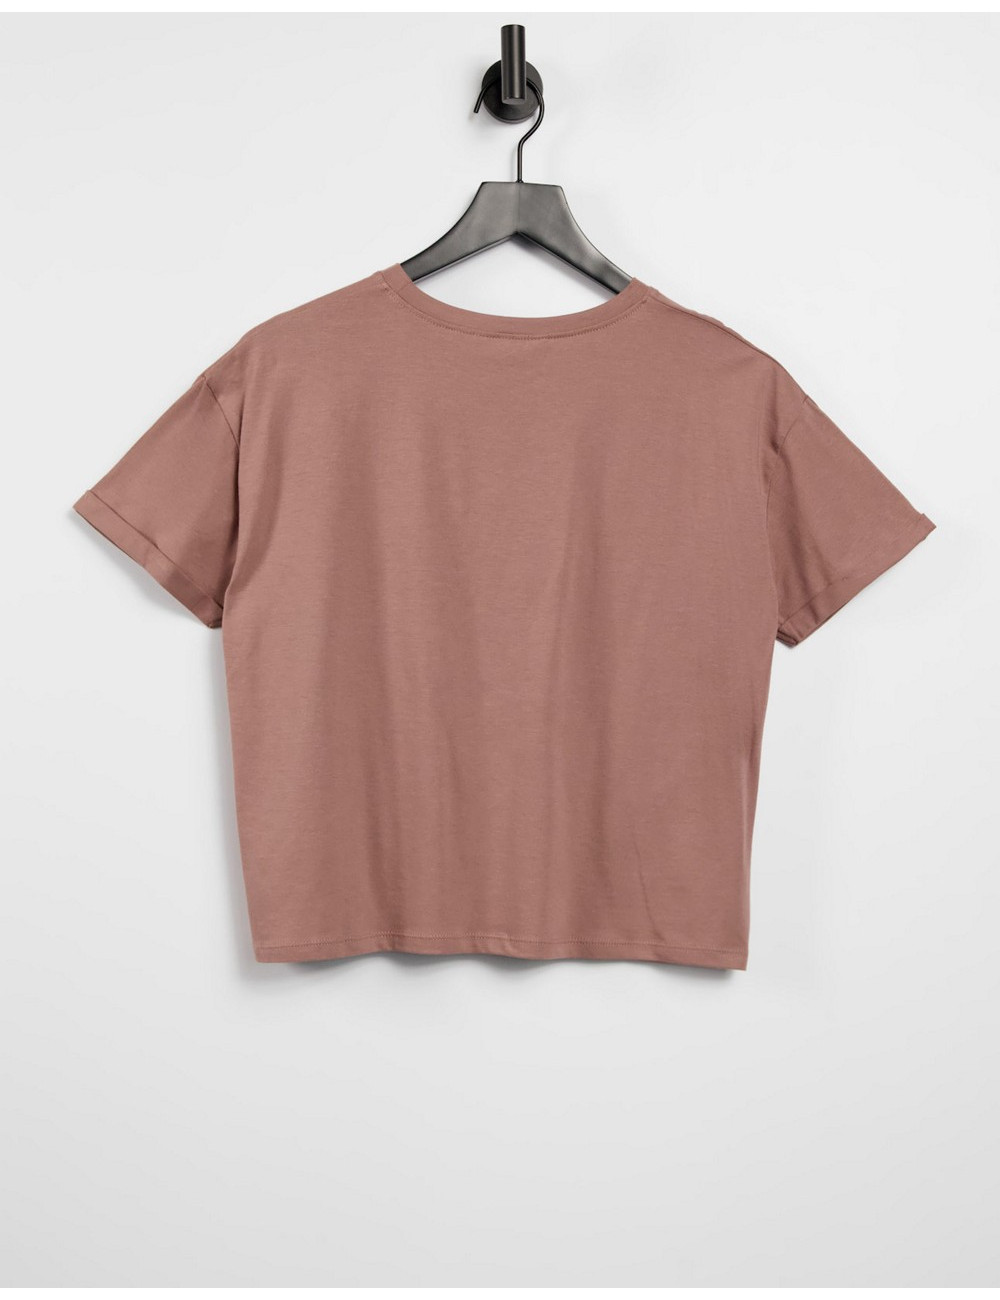 New Look boxy tee in mink